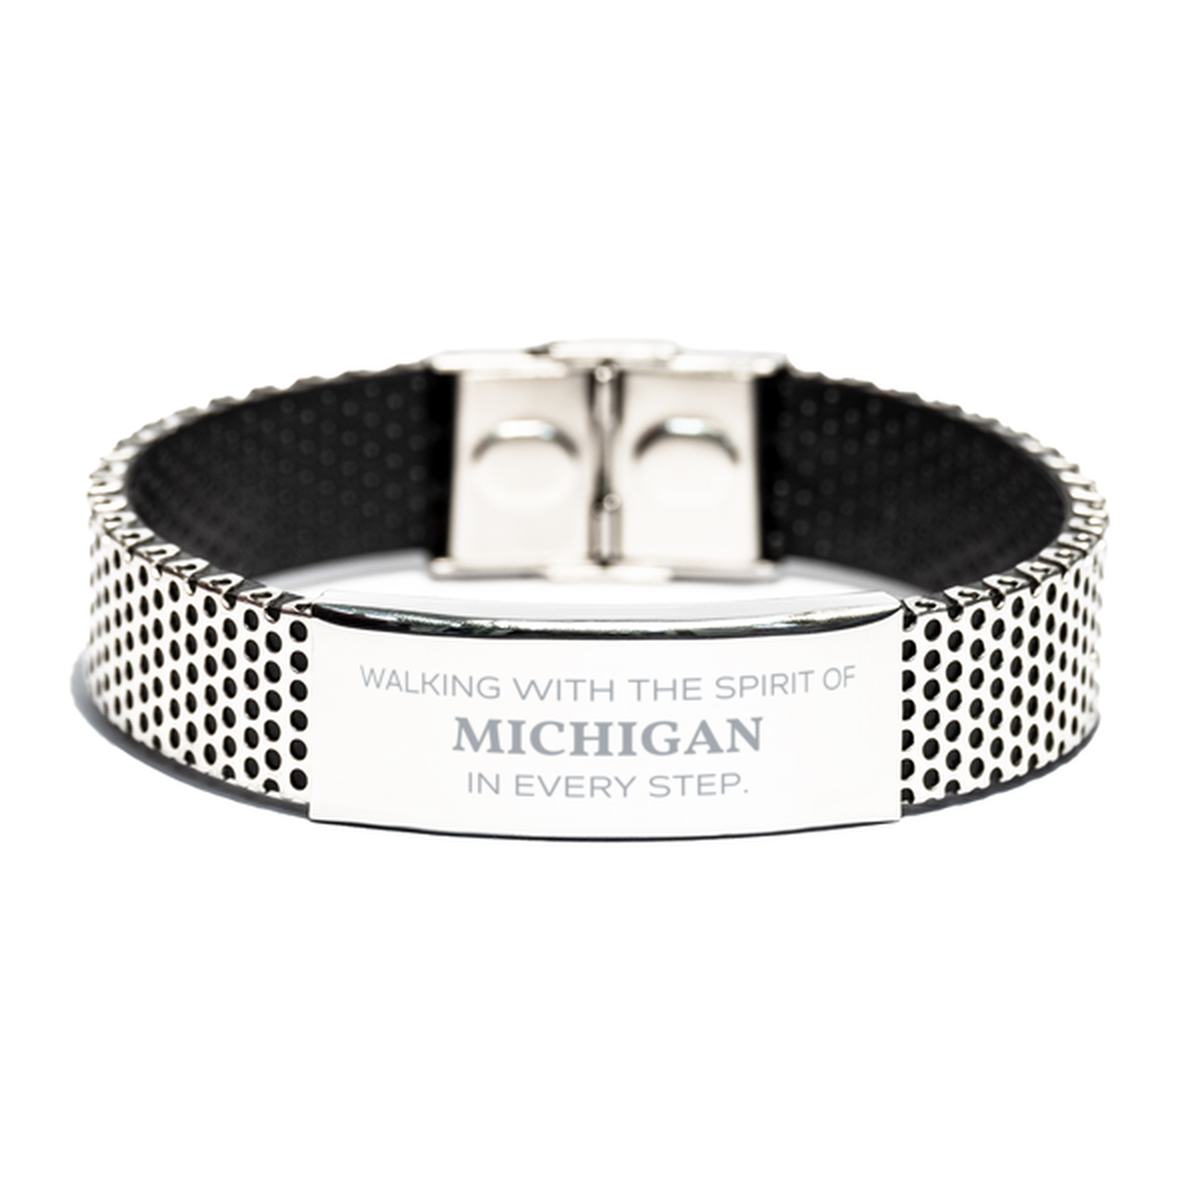 Michigan Gifts, Walking with the spirit, Love Michigan Birthday Christmas Stainless Steel Bracelet For Michigan People, Men, Women, Friends